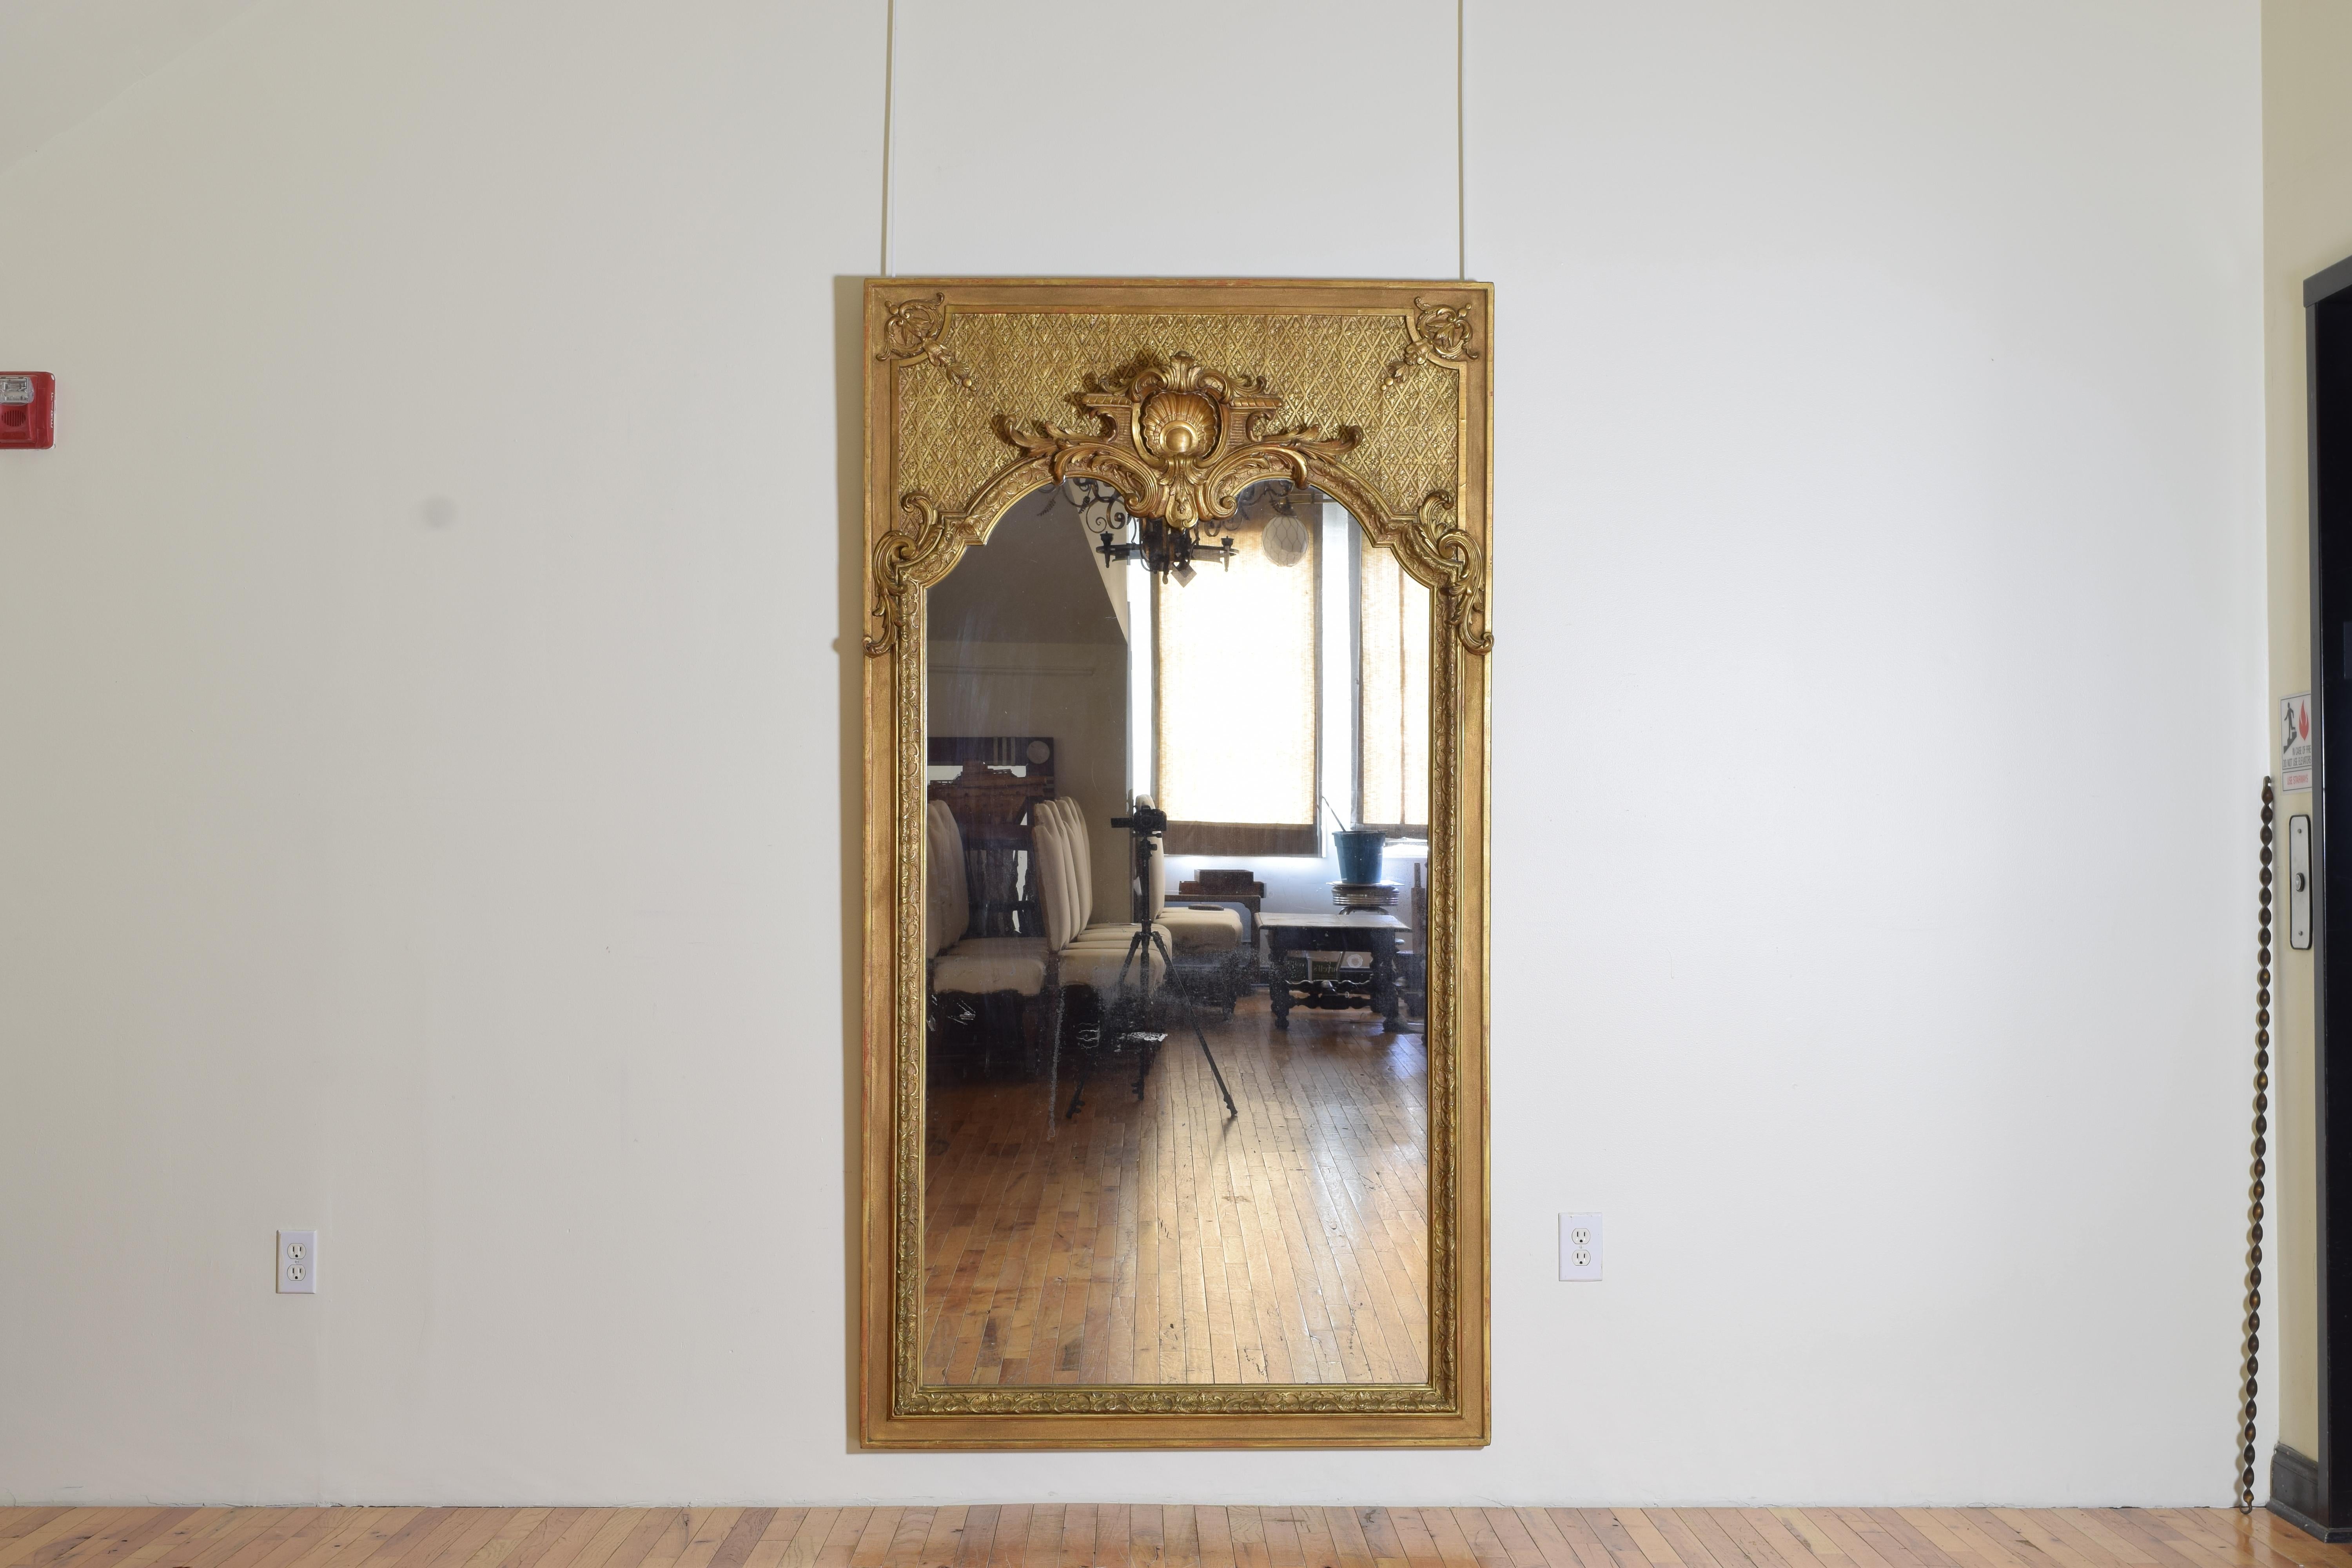 Covered entirely in 23.5 karat gold which has a slightly darker hue than 24 karat gold which appears slightly more red, this mirror incorporates elements of the French Regence period with its criss-crossed lozenge form design in the upper section